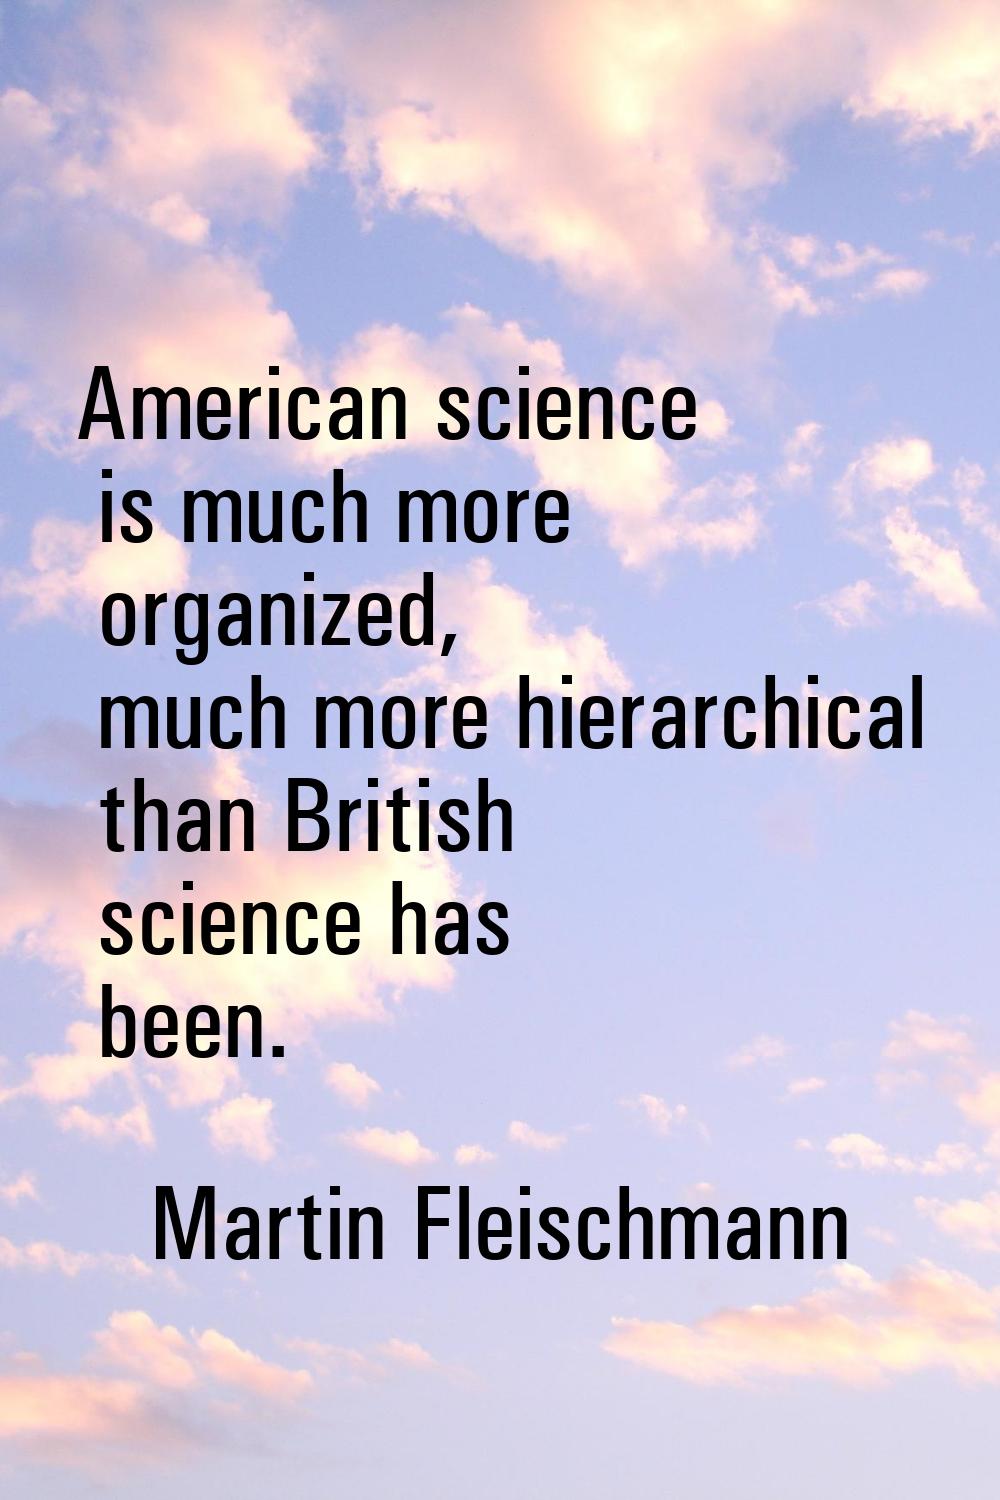 American science is much more organized, much more hierarchical than British science has been.